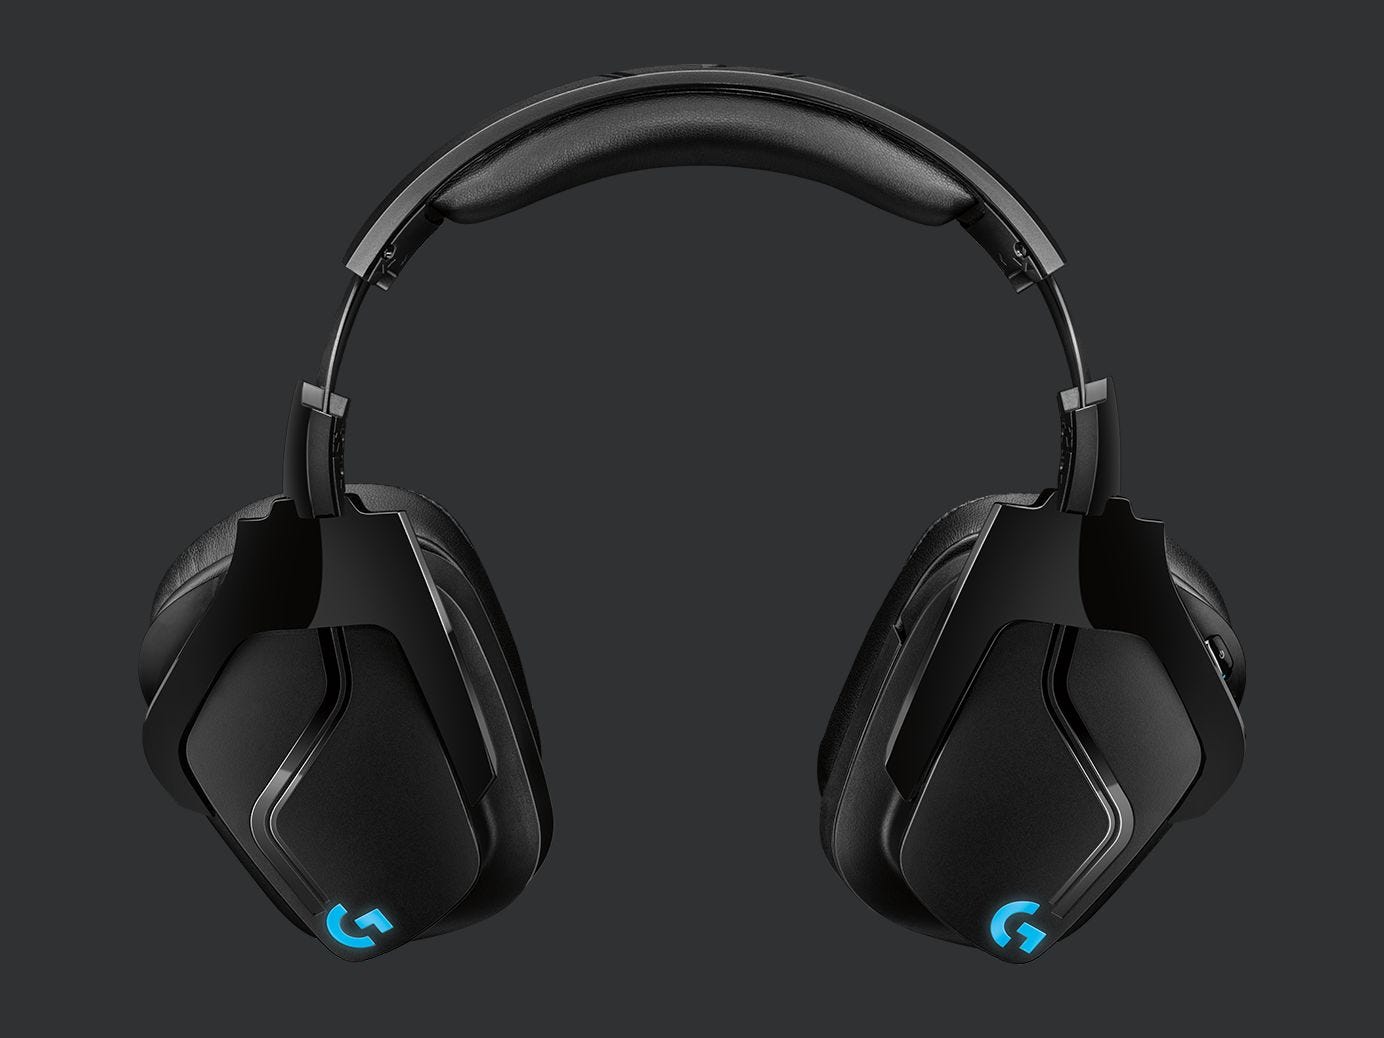 I Don't Understand Logitech's New Headsets | by Alex Rowe | Medium